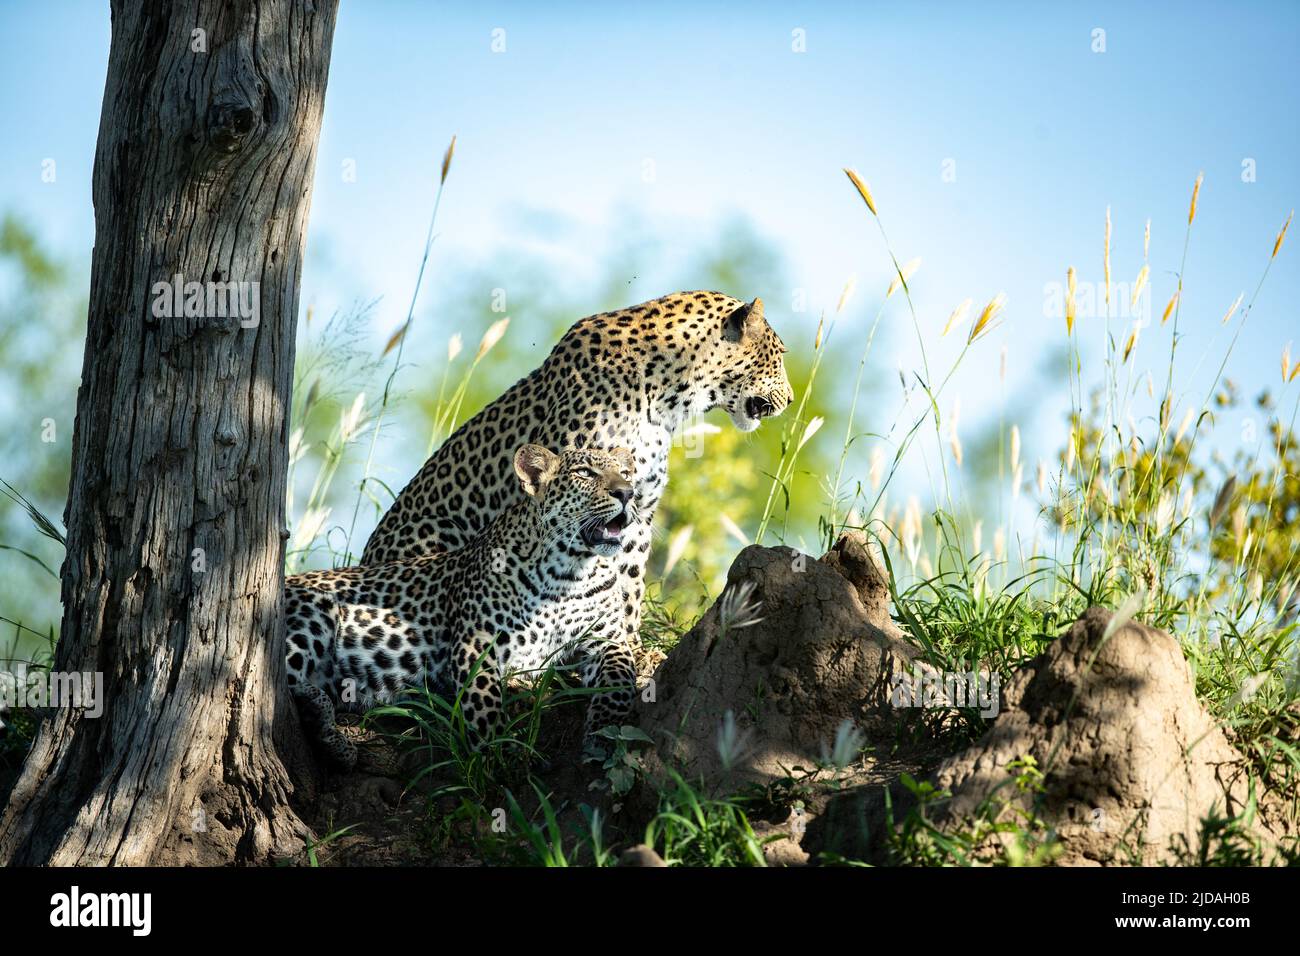 A mother and leopard cub, Panthera pardus, rest together in the shade of a tree Stock Photo